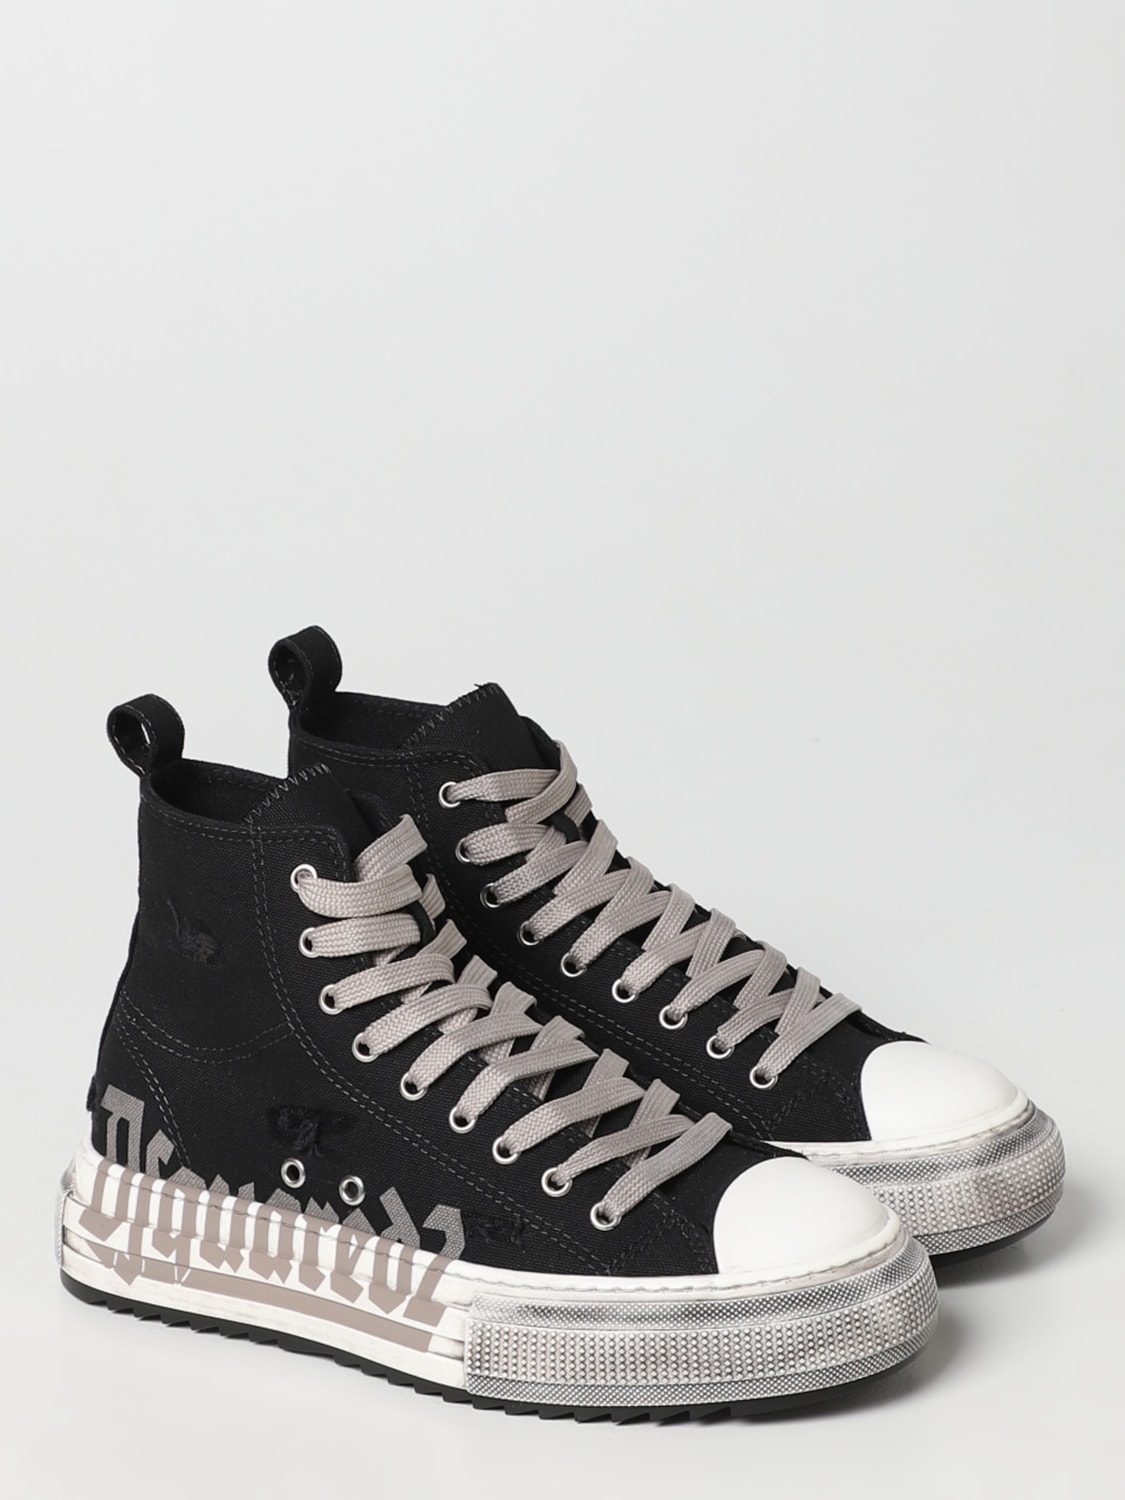 Fern Arving fremsætte Dsquared2 Outlet: Berlin sneakers in fabric - Black | Dsquared2 sneakers  SNM029325406367 online at GIGLIO.COM